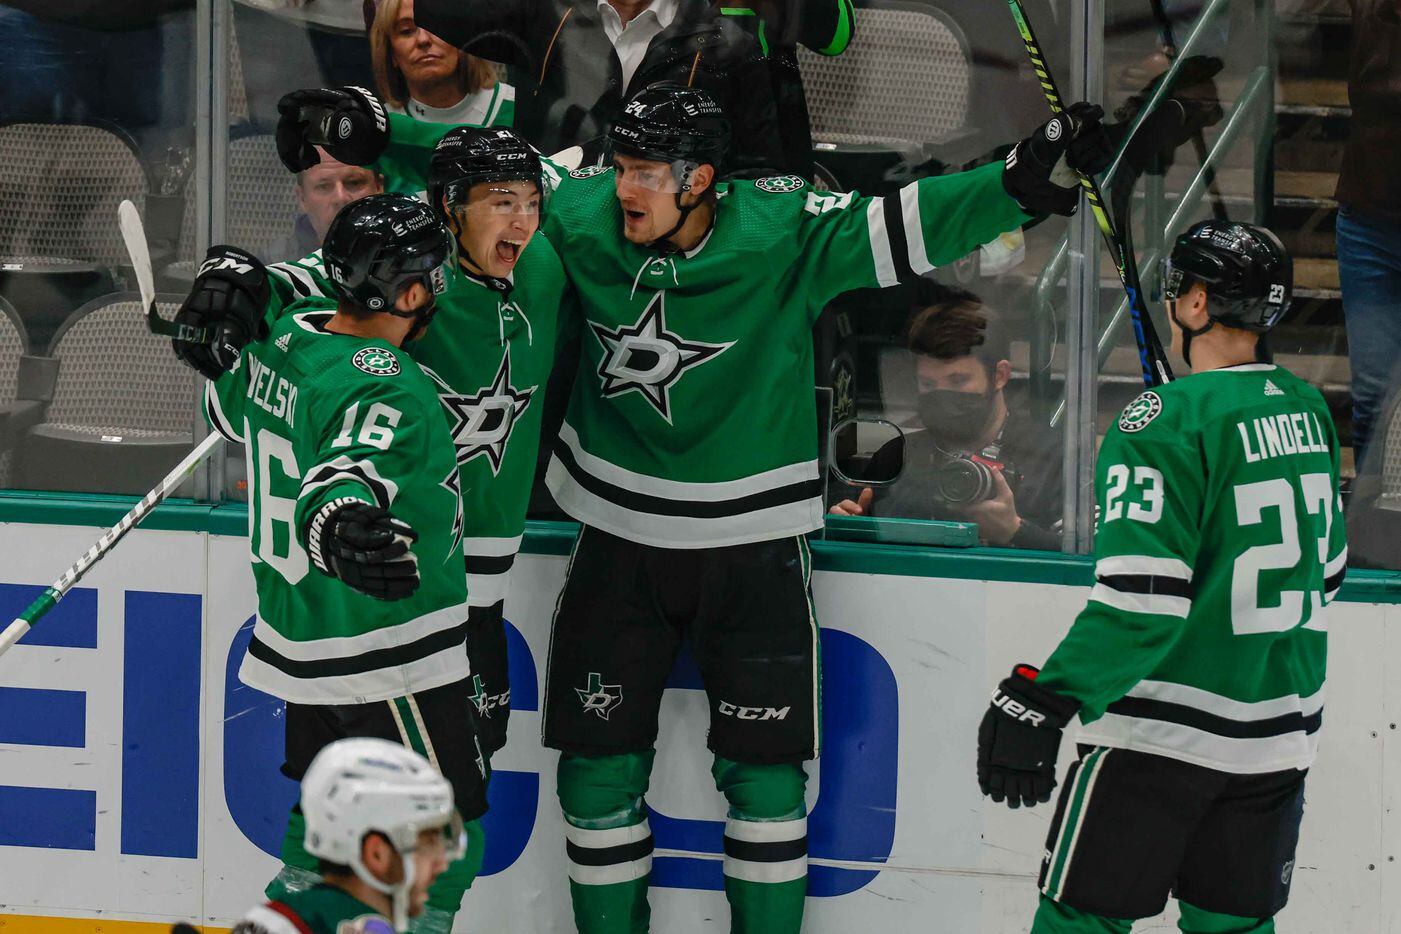 Dallas Stars left wing Roope Hintz (24) celebrates his goal against the Arizona Coyotes with his teammates left wing Jason Robertson (21), center Joe Pavelski (16) and defenseman Esa Lindell (23) during first period at the American Airlines Center in Dallas on Monday, December 6, 2021. (Lola Gomez/The Dallas Morning News)